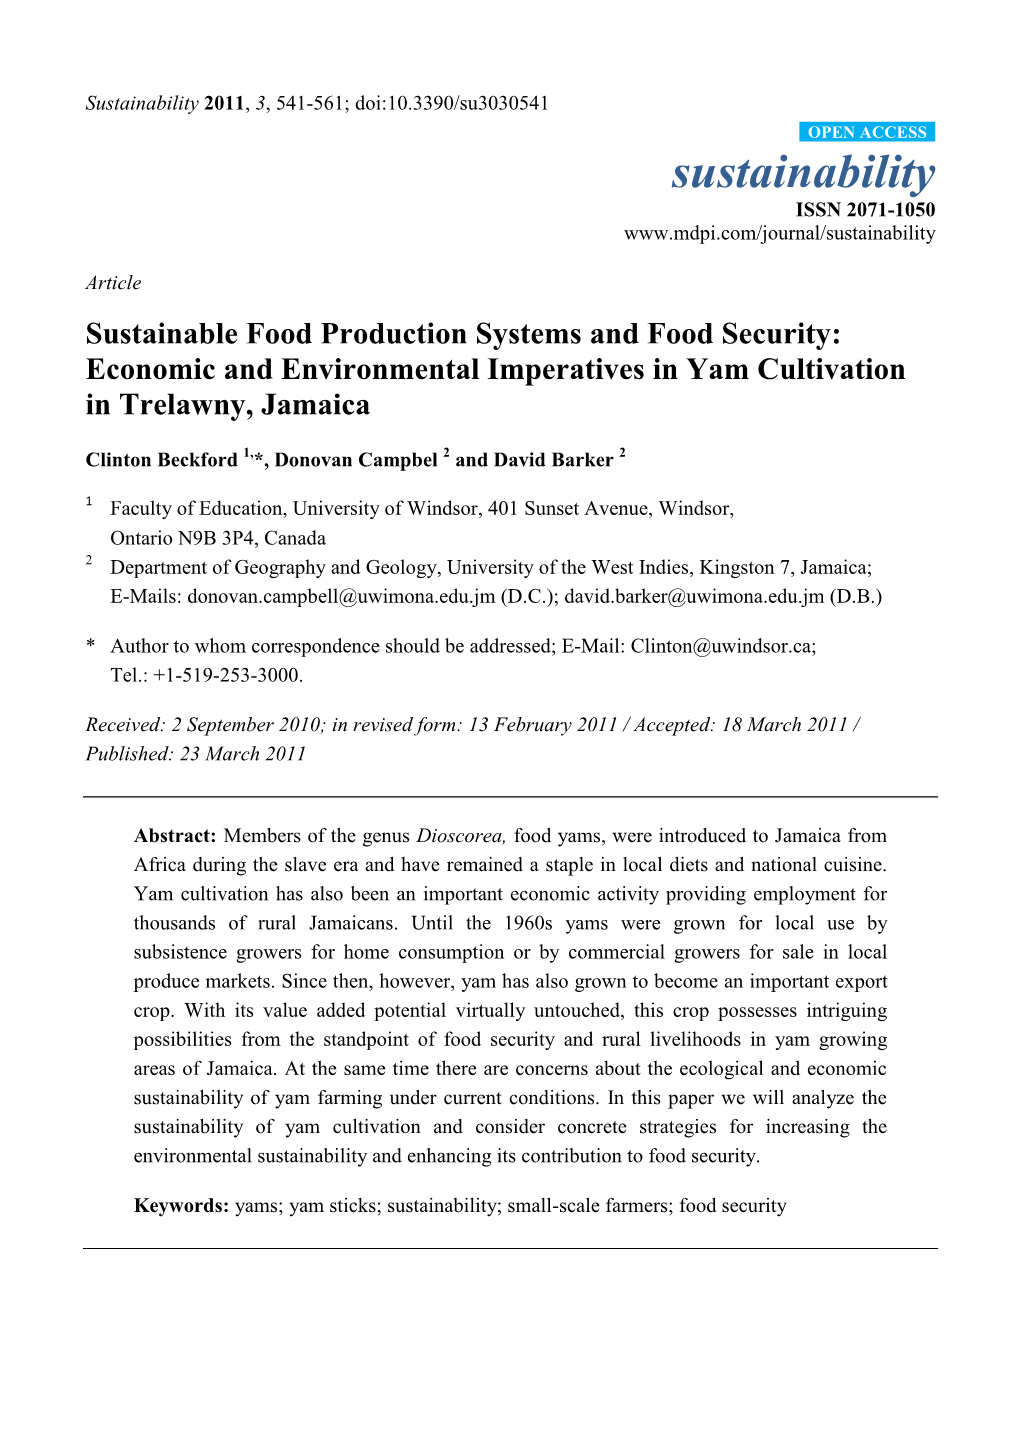 Economic and Environmental Imperatives in Yam Cultivation in Trelawny, Jamaica